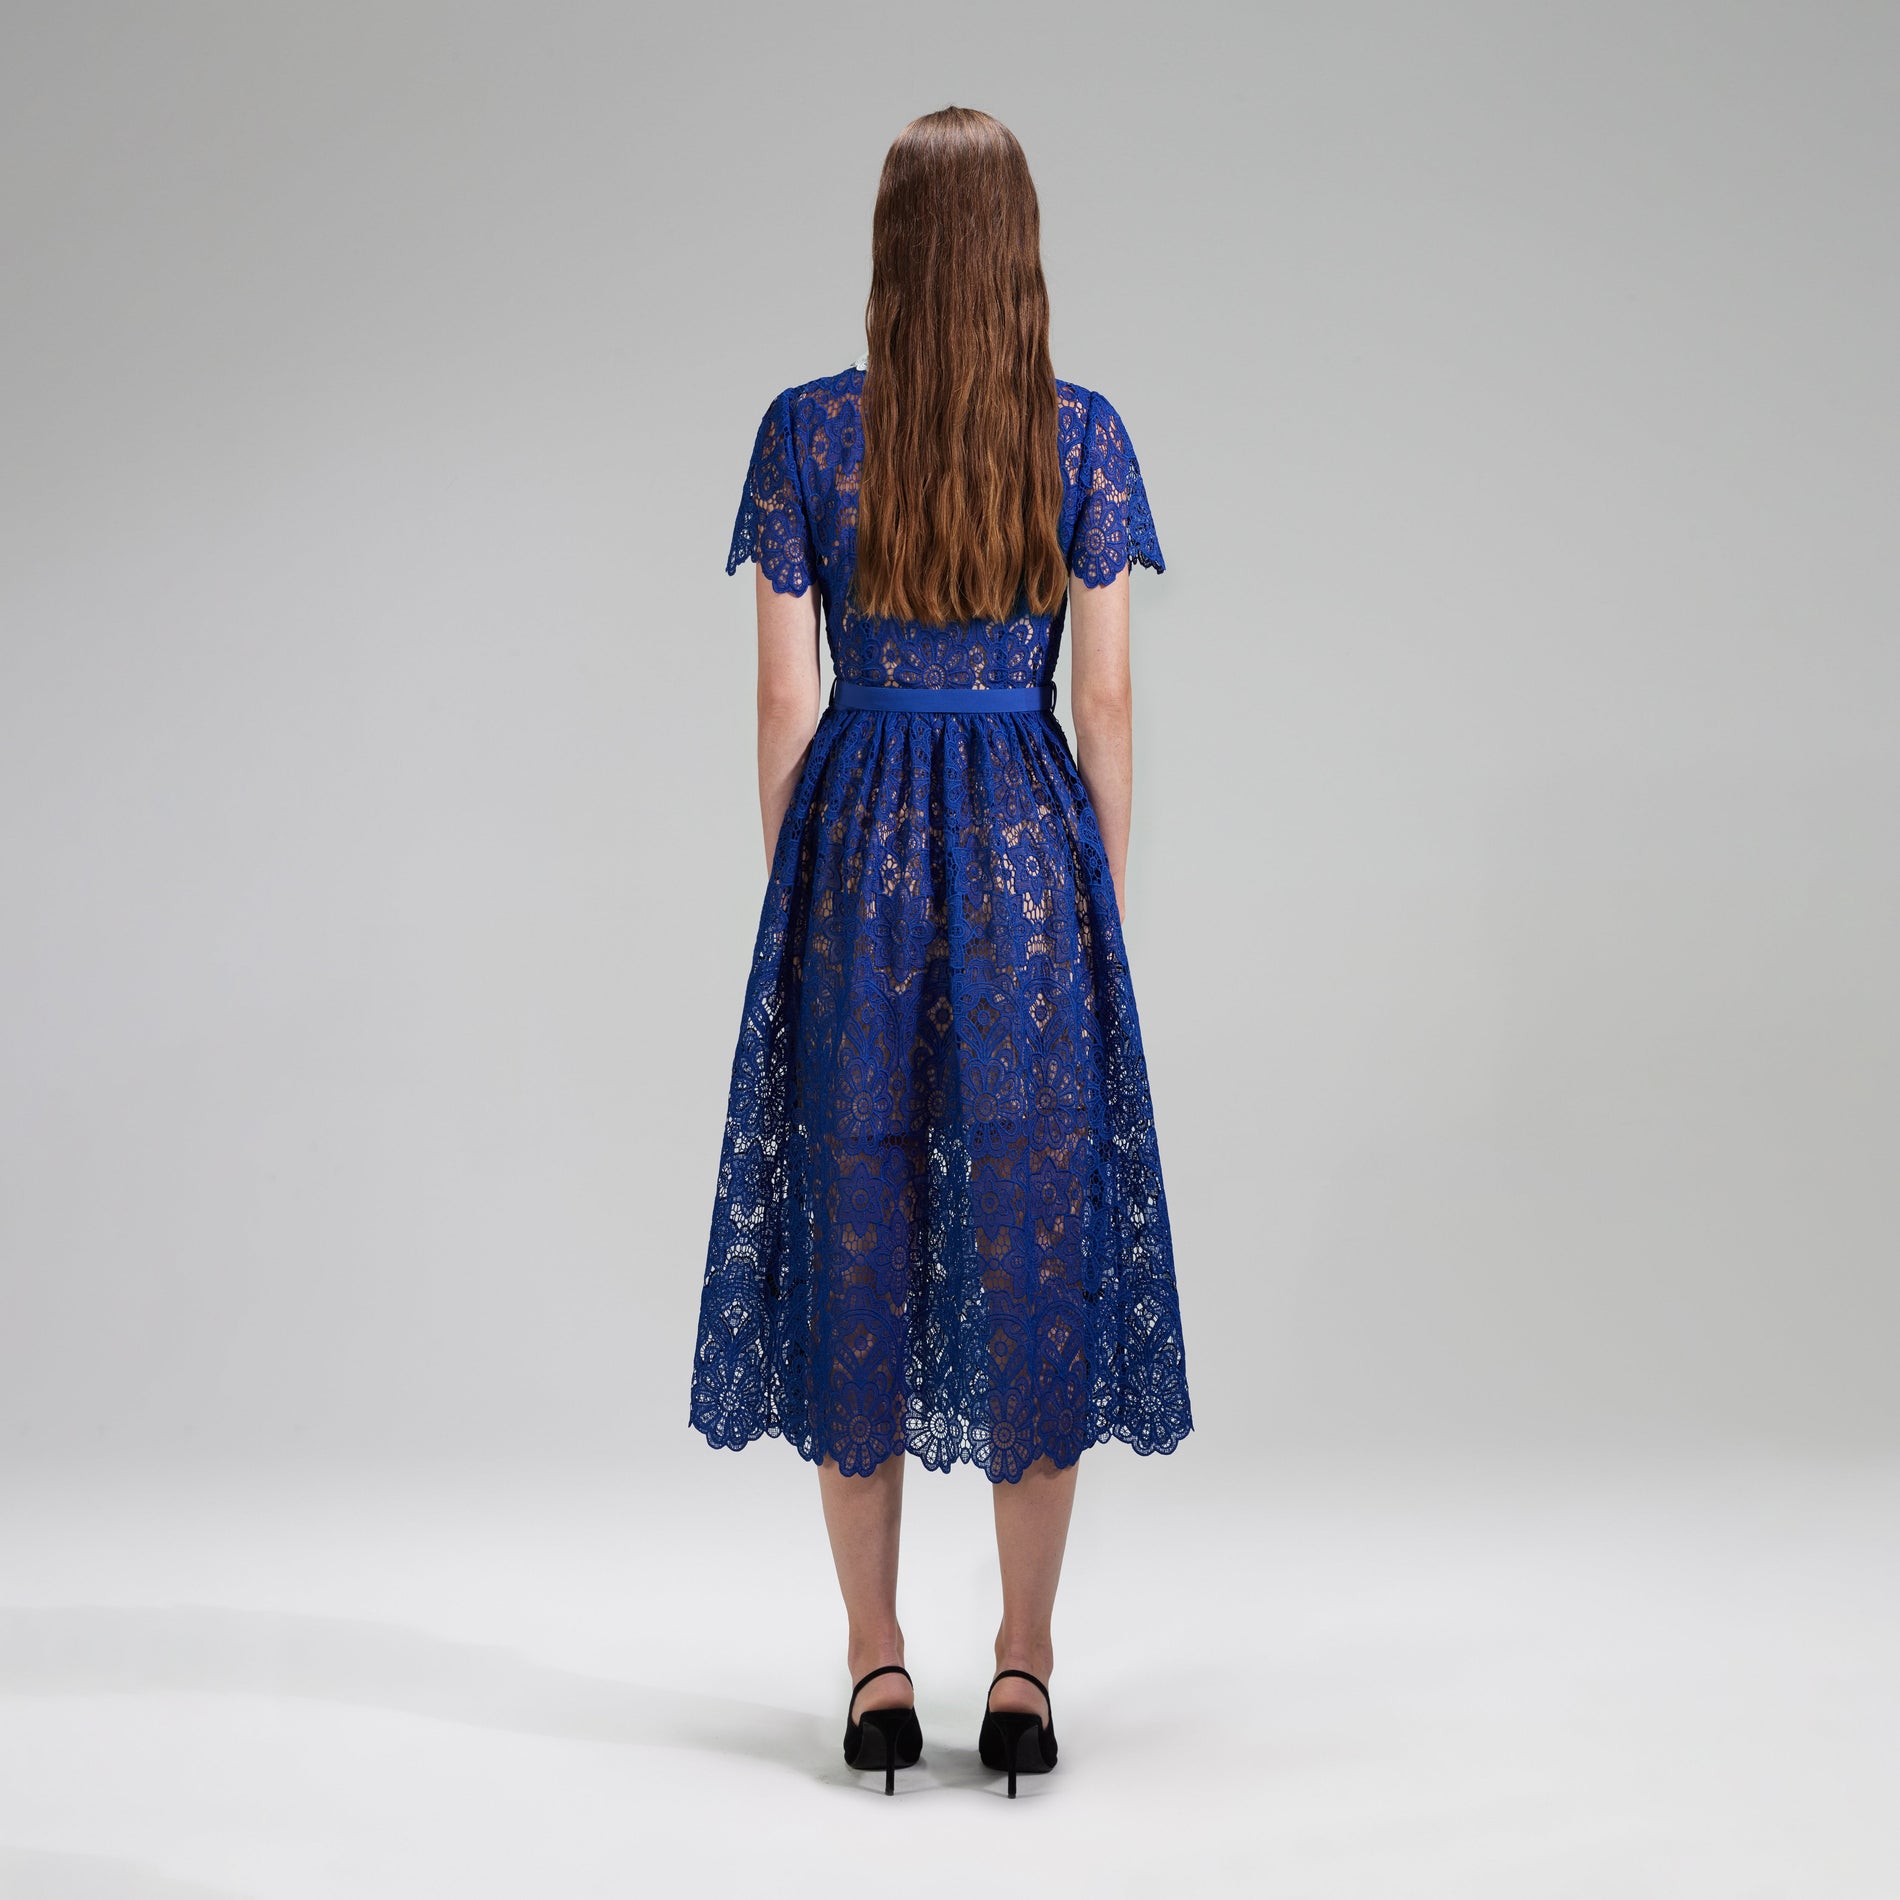 A woman wearing the Blue Lace Midi Dress Contrast Collar